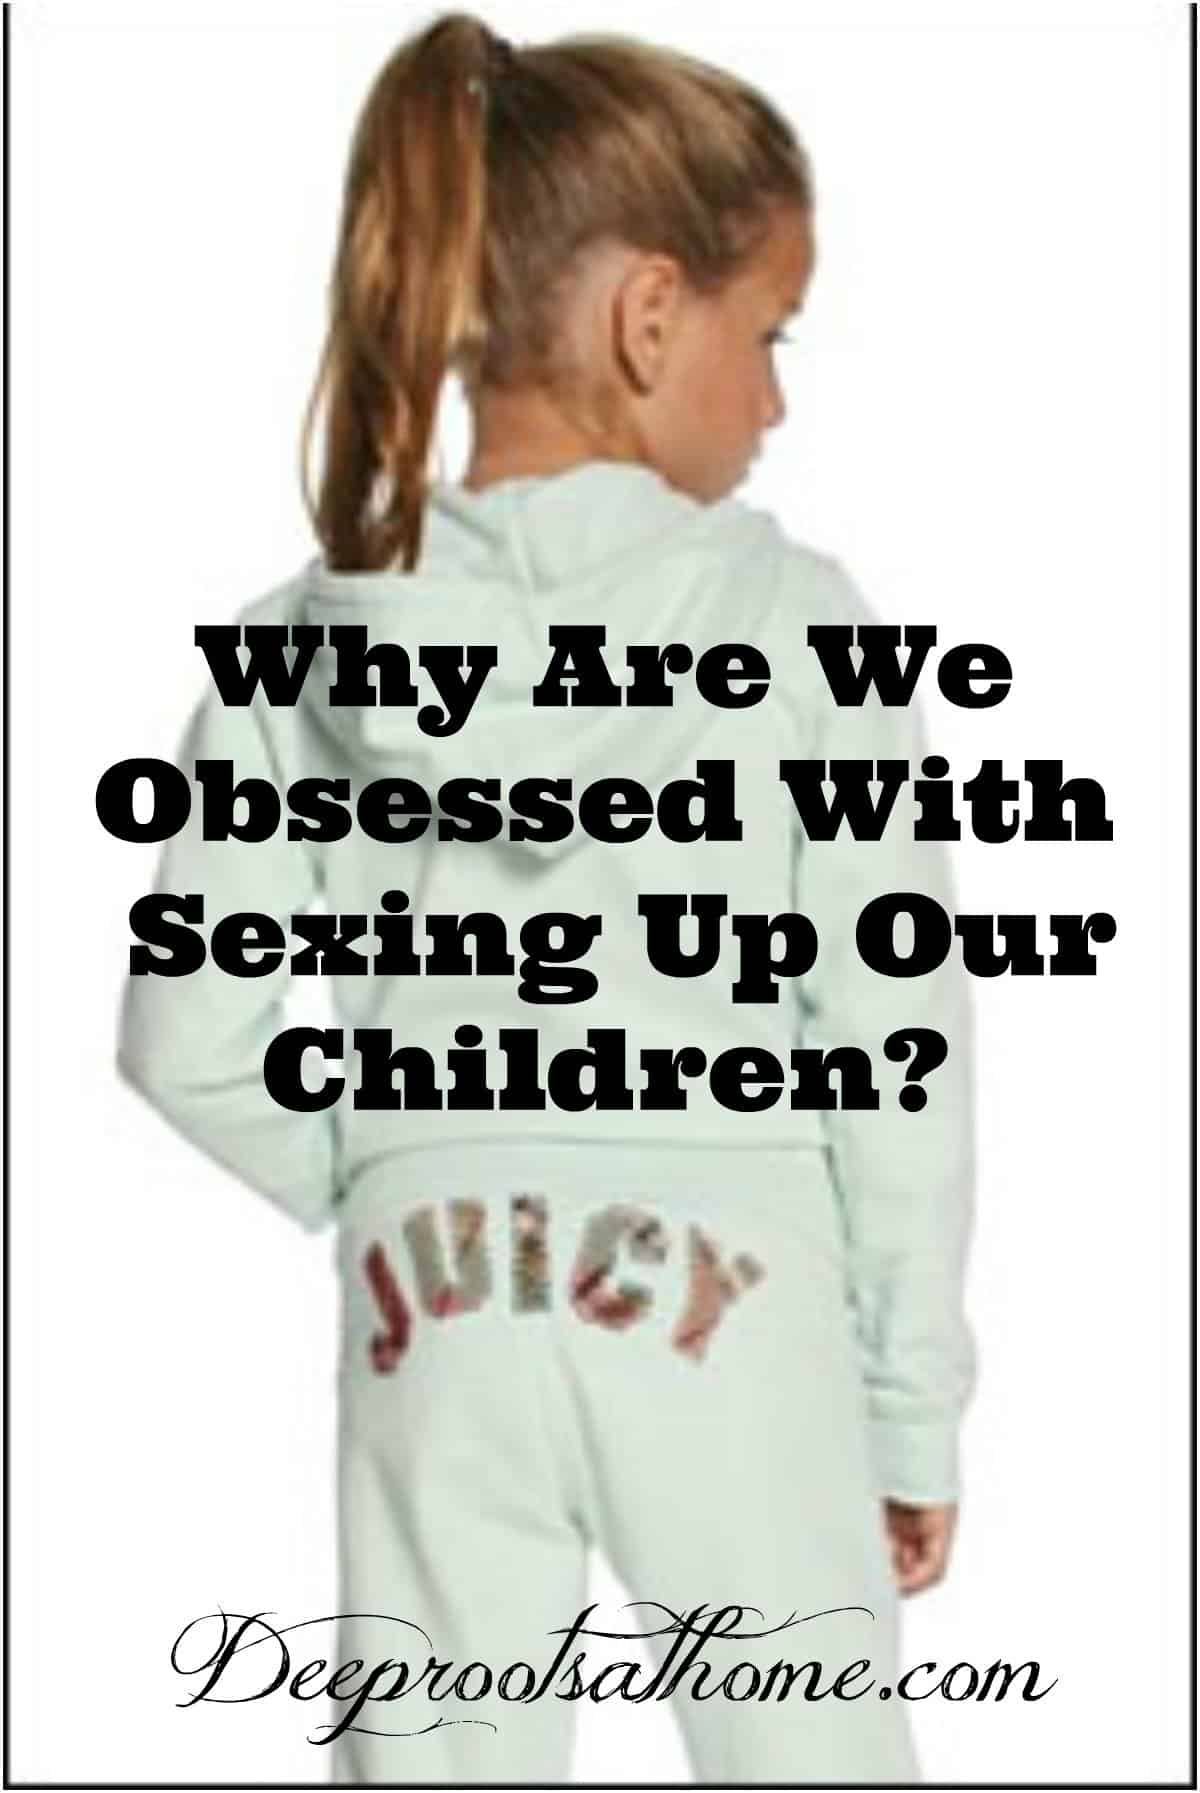 Why Are We Obsessed With Sexing Up Our Children? A young girl dressed in white sweats with the word 'Juicy' written on her bottom